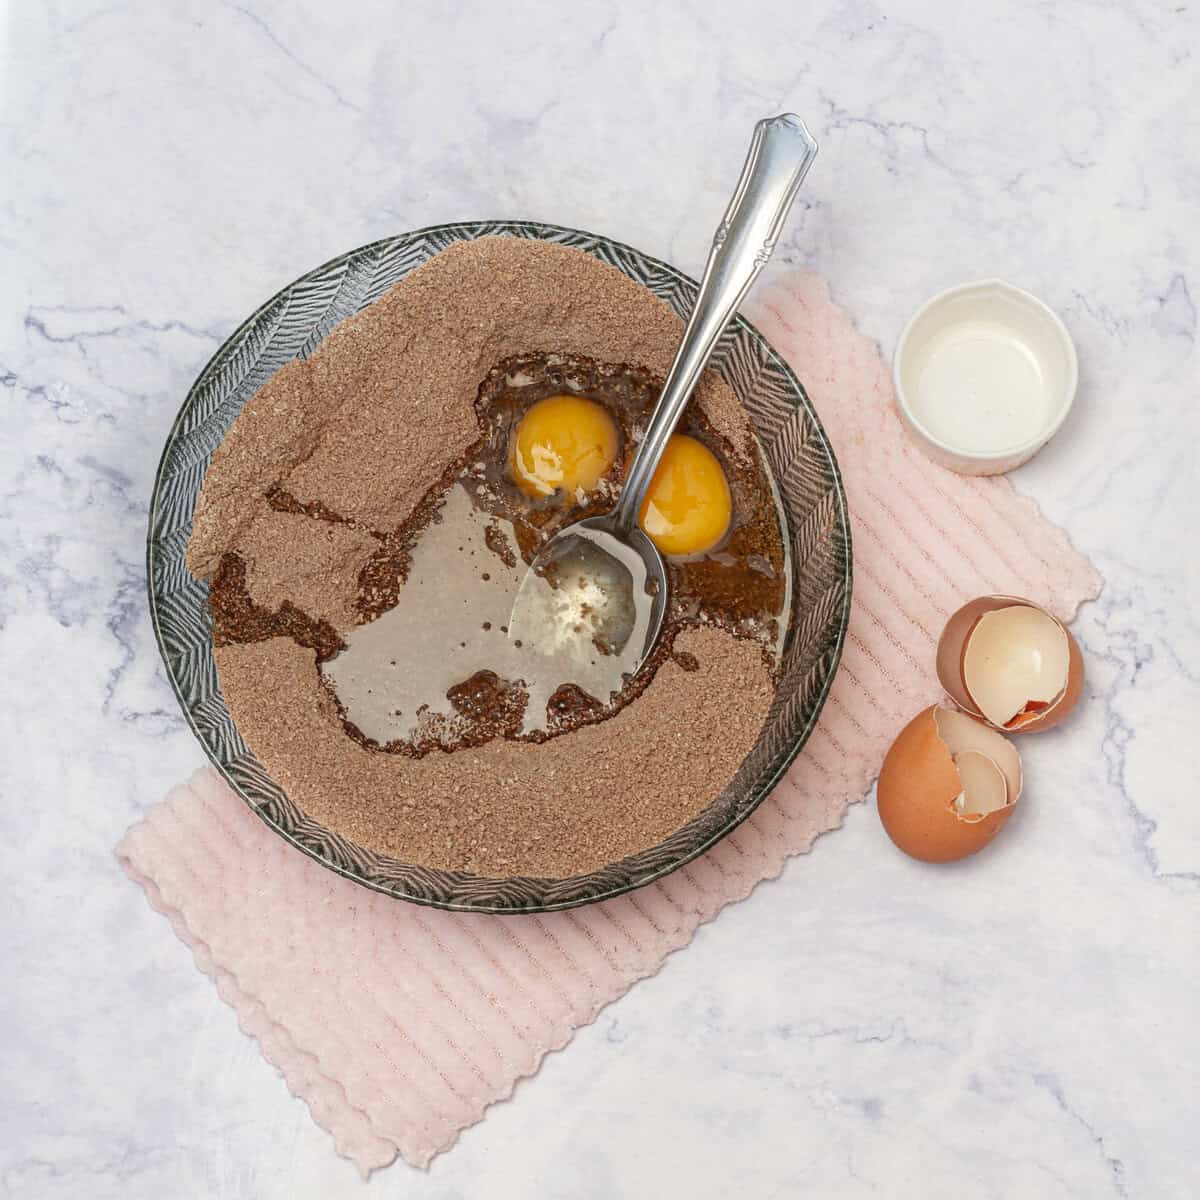 eggs, oil, and water added to Chocolate Cookies dry ingredients